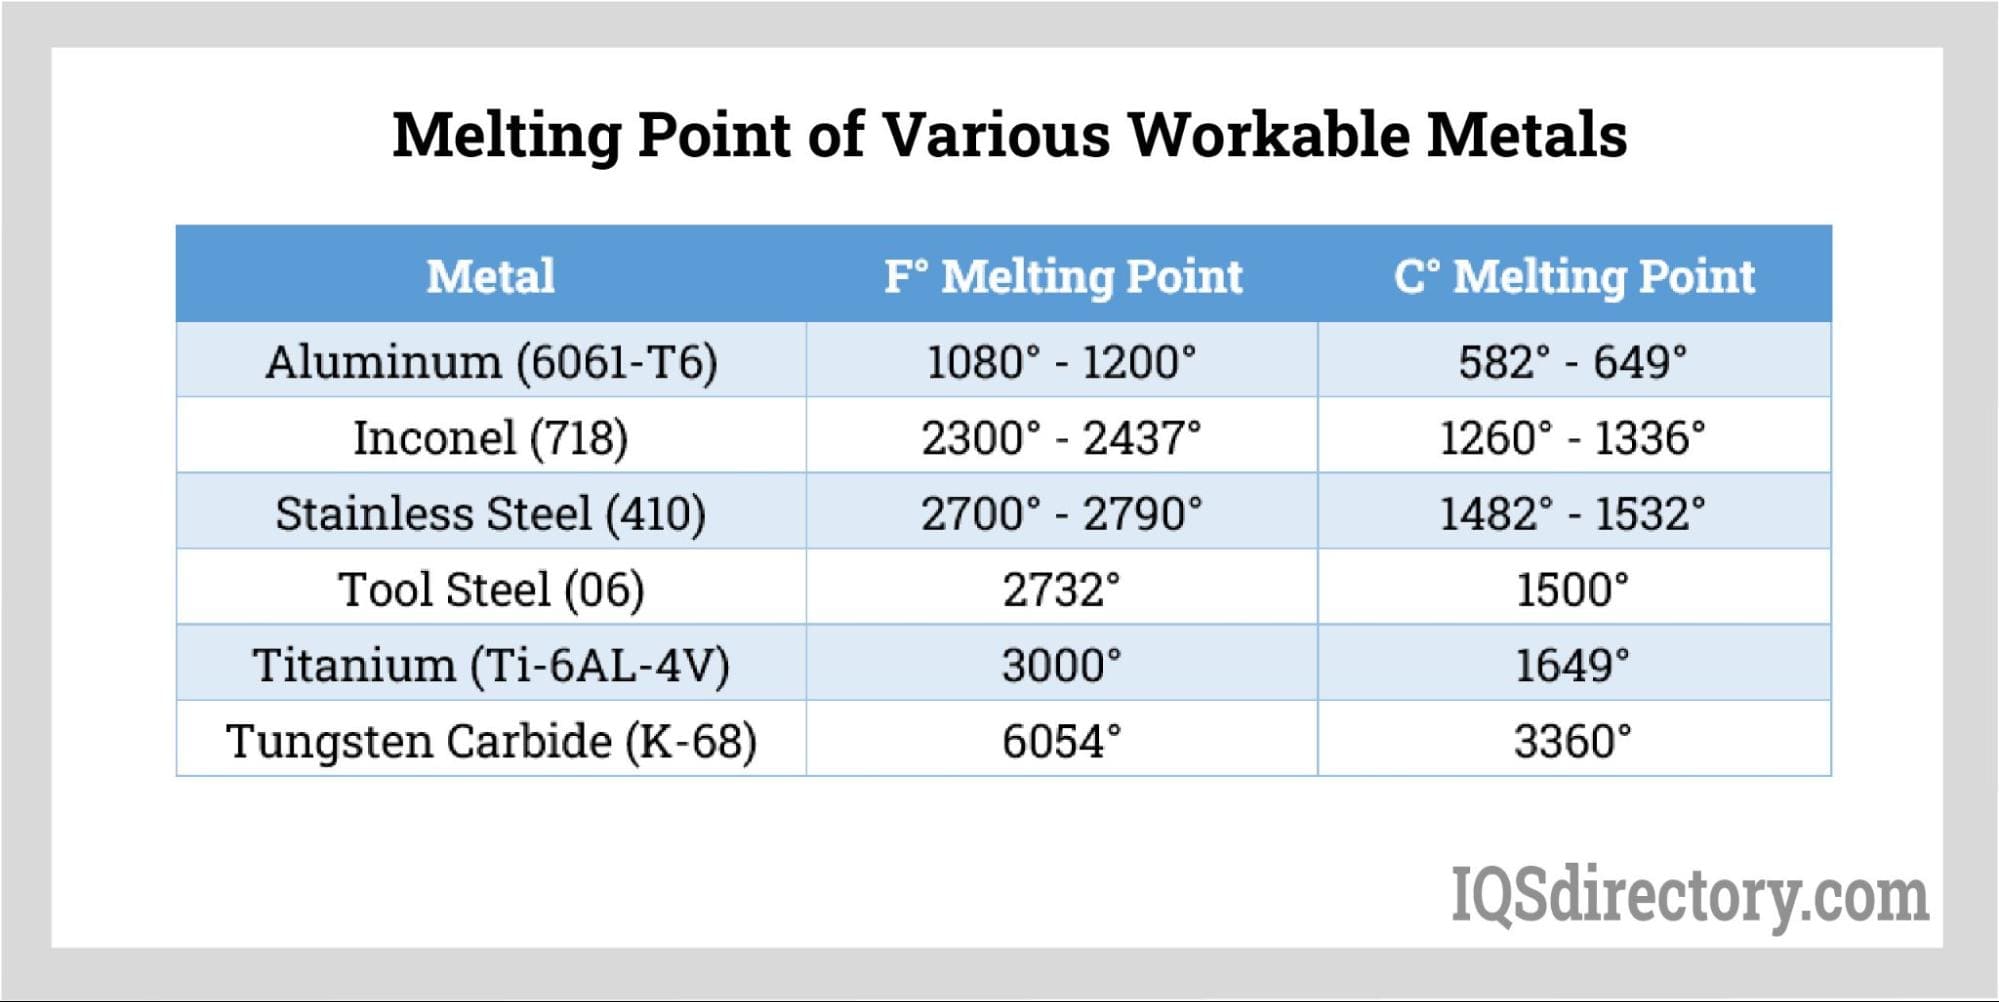 Melting Point of Various Workable Metals